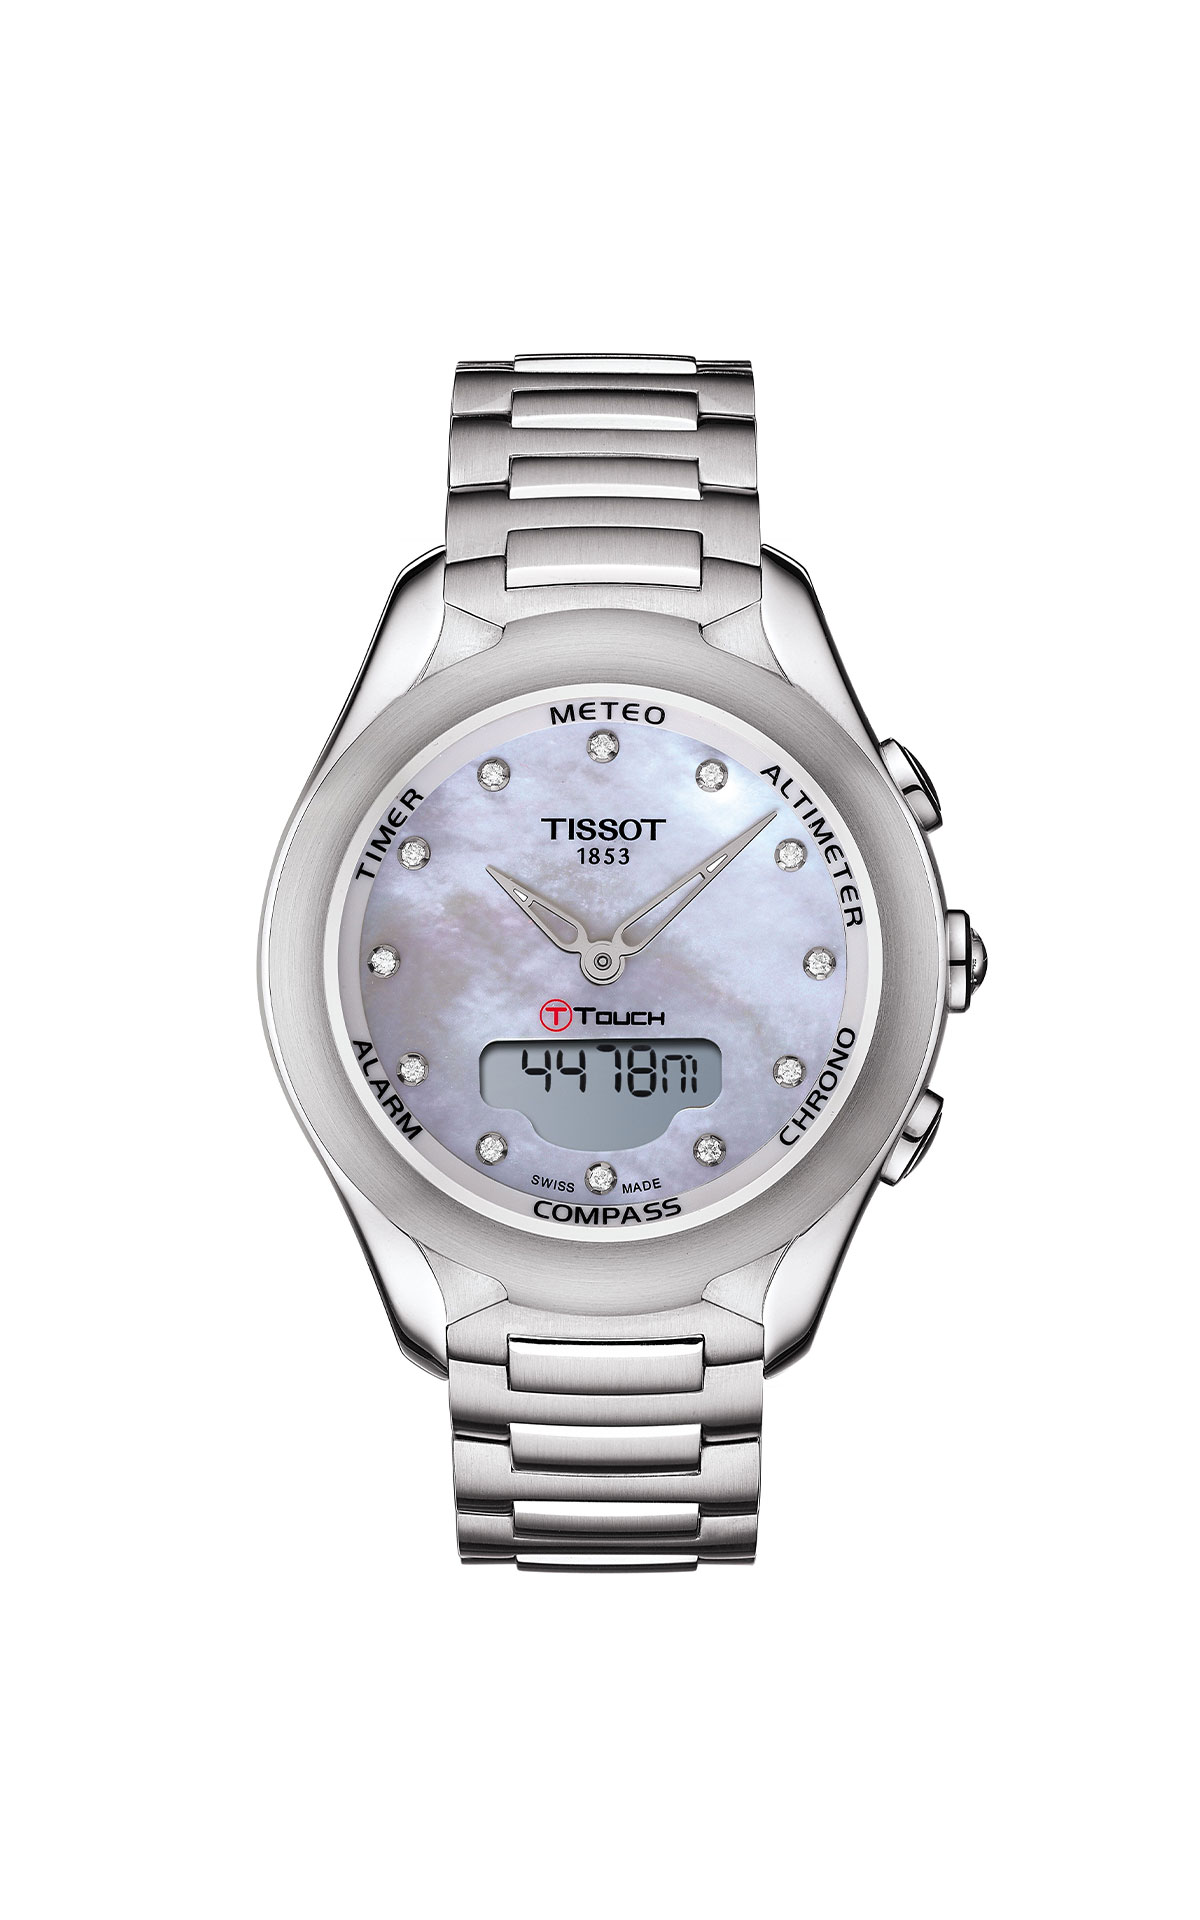 Tissot T-Touch solar watch from Bicester Village